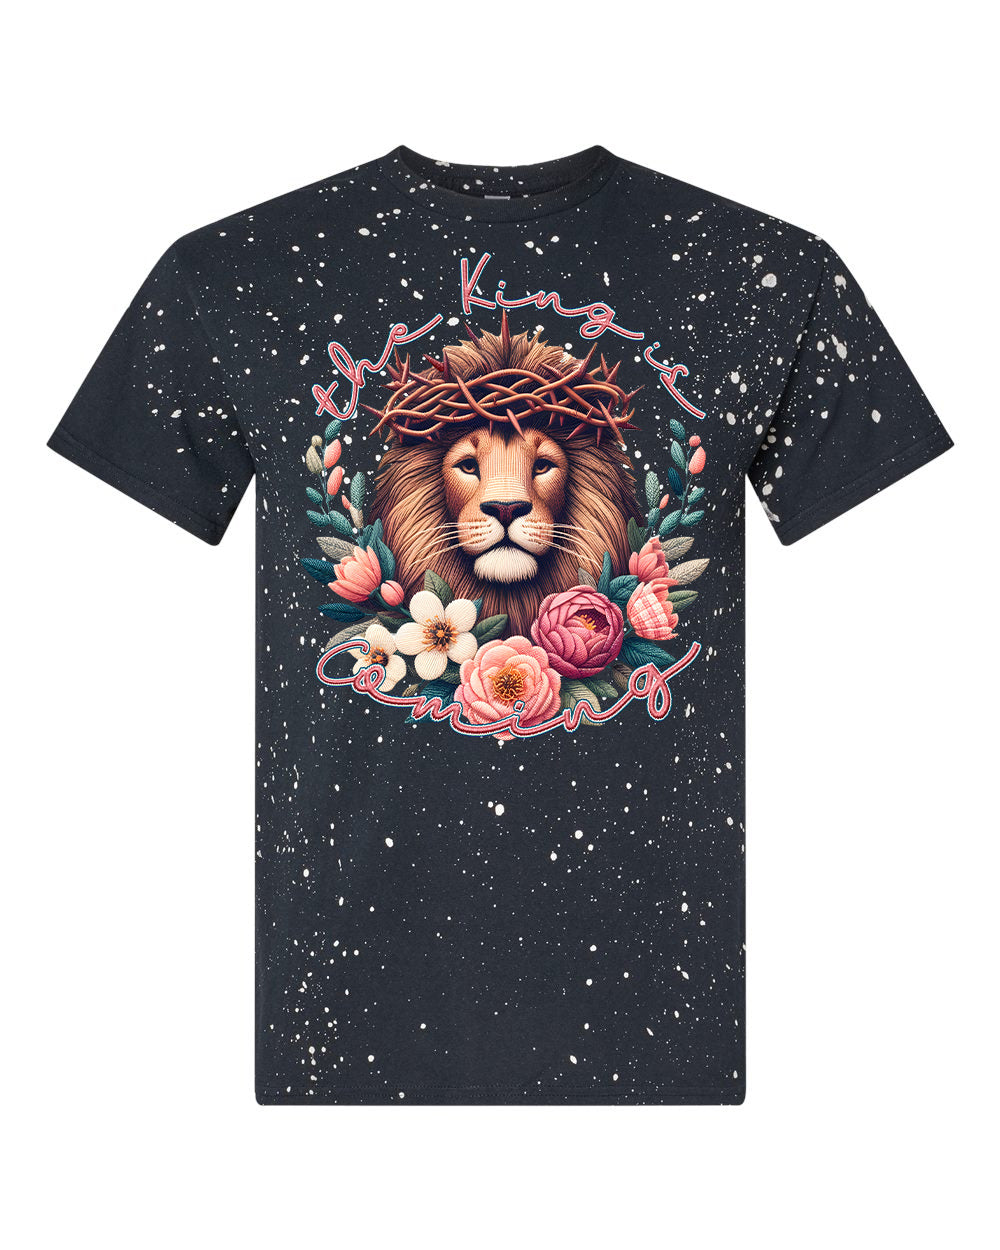 The King is Coming Graphic Tee